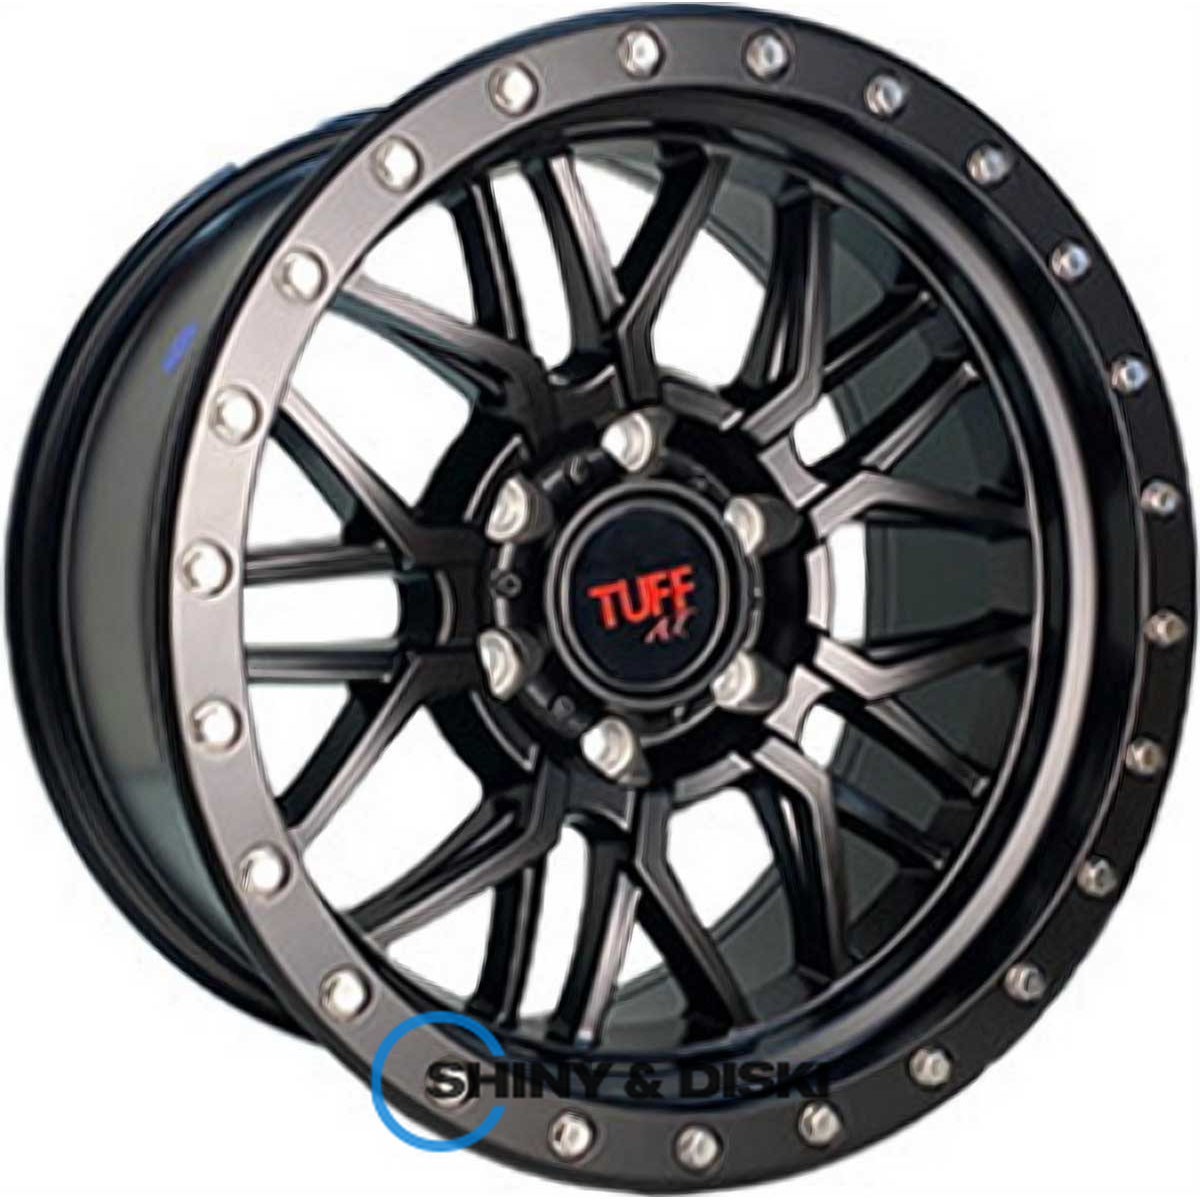 off road wheels ow2131 mb